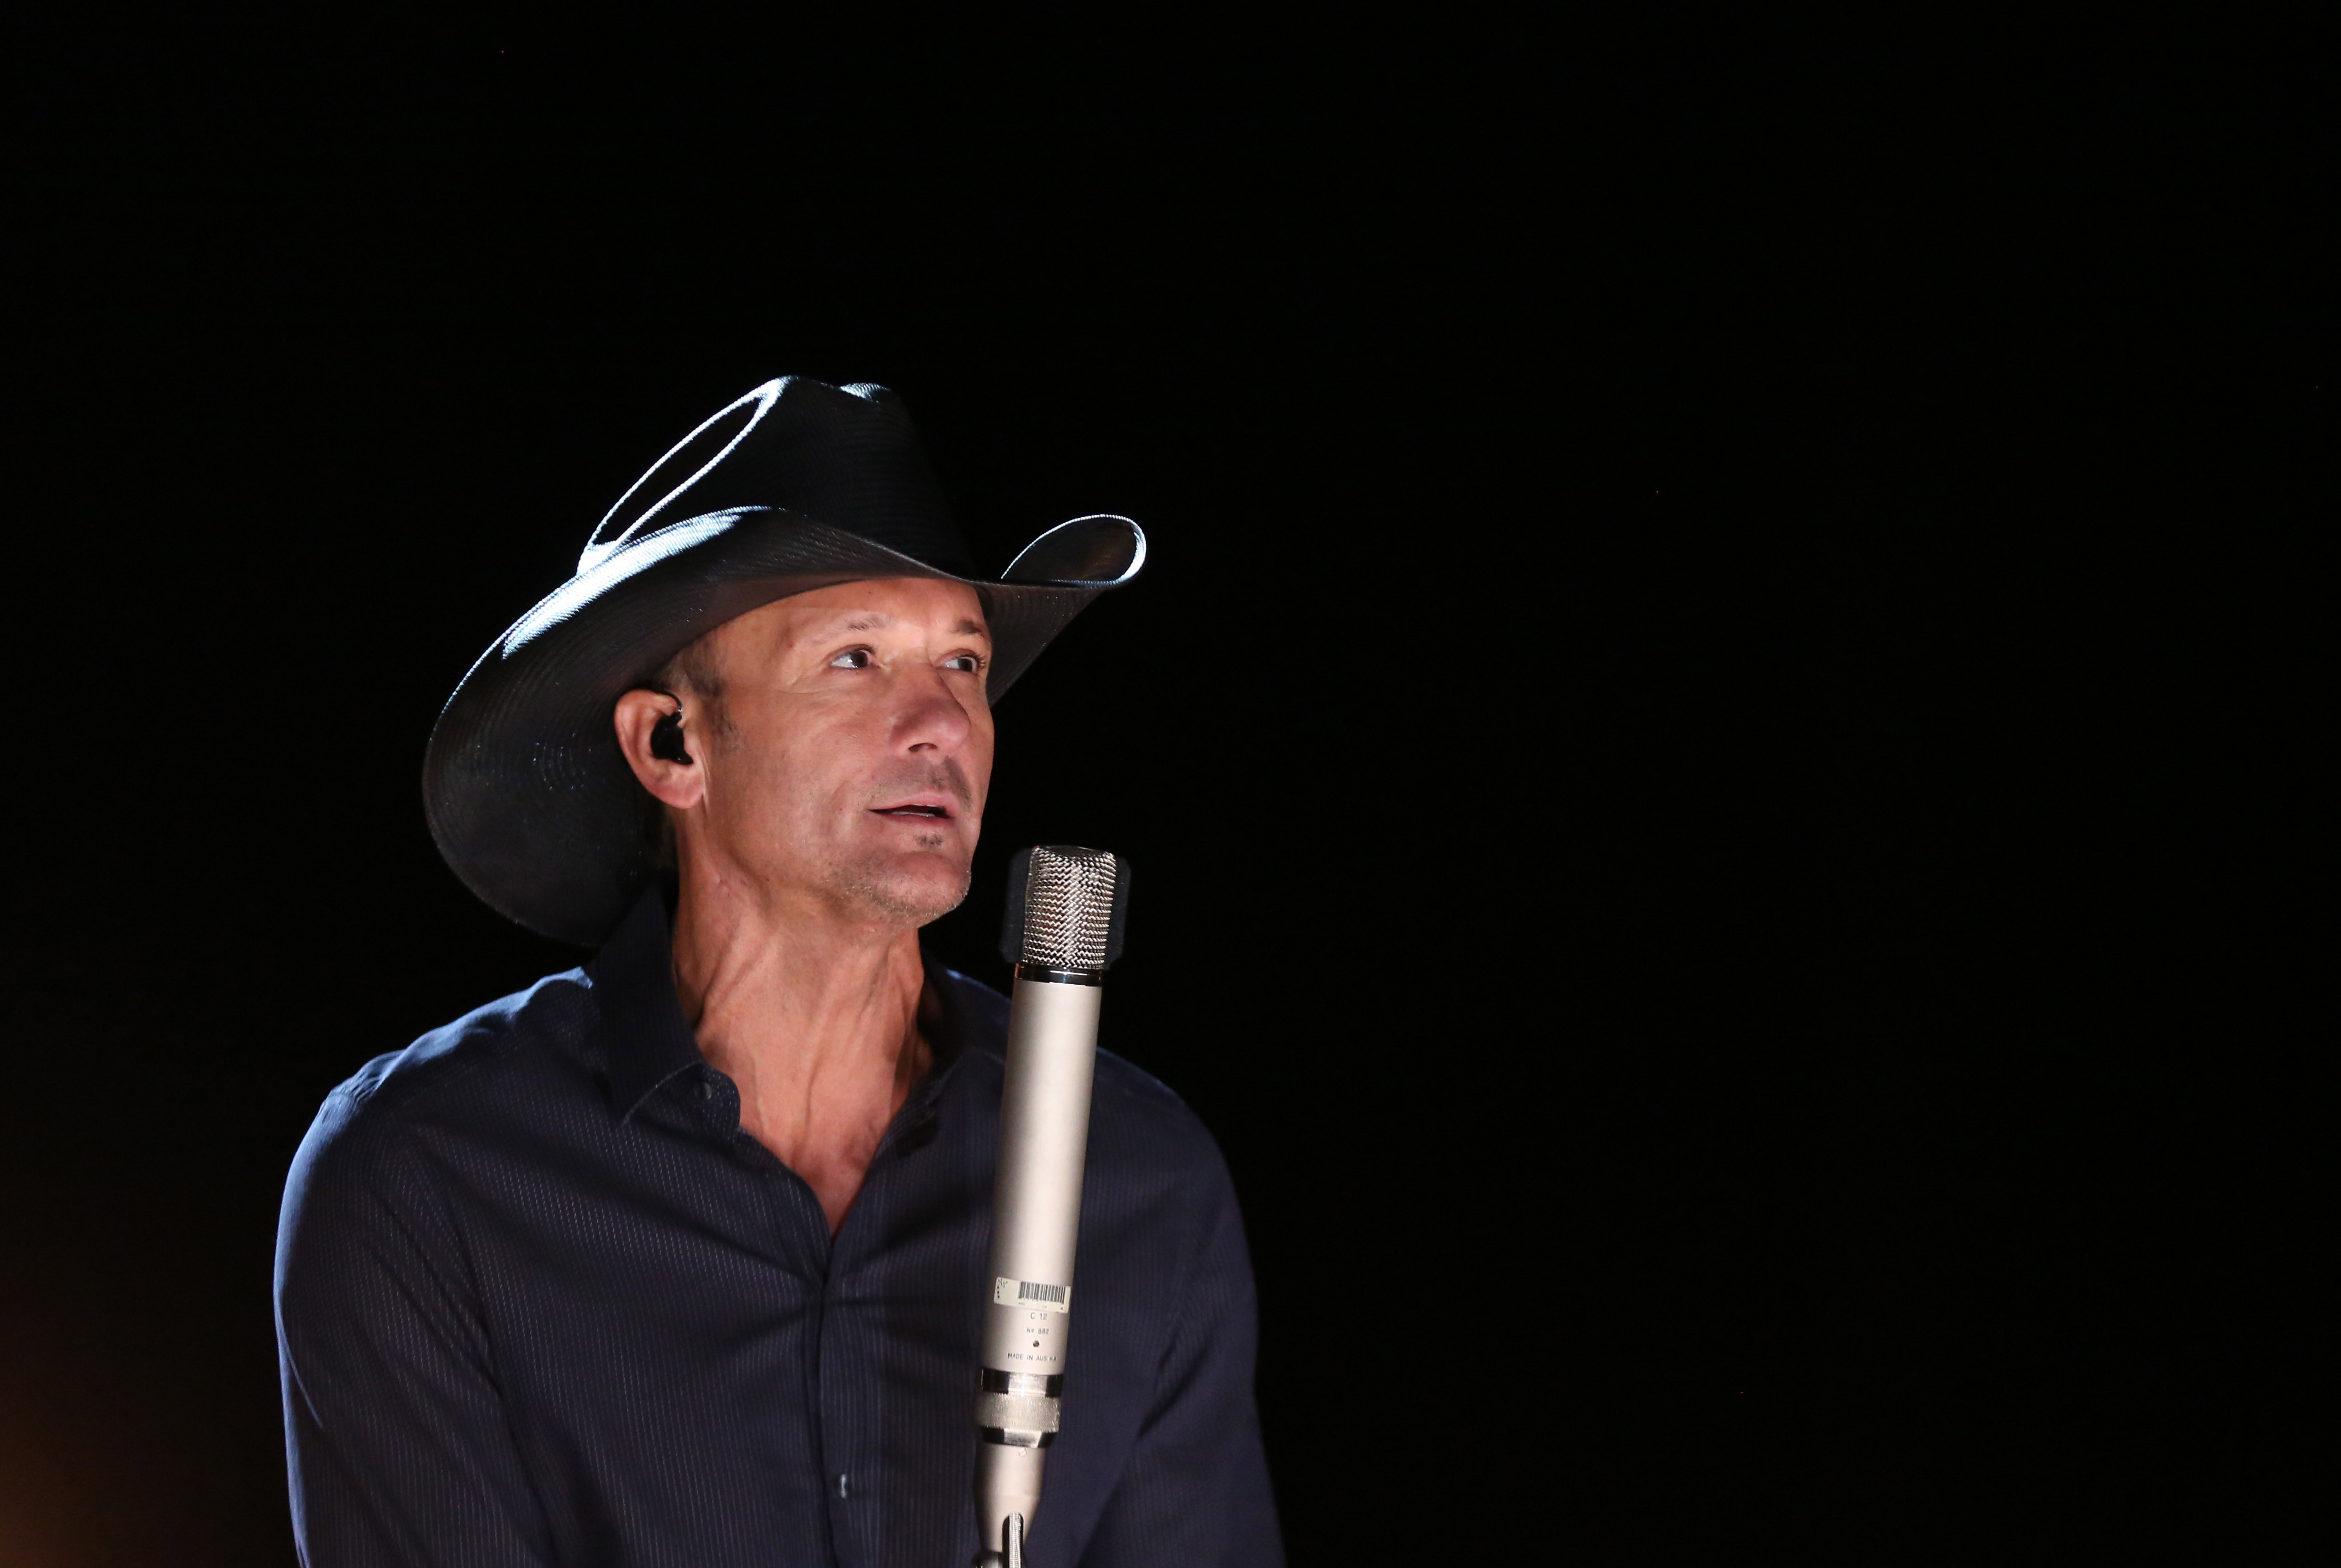 Tim McGraw performs during rehearsals for the 87th Academy Awards in Los Angeles, Feb. 20, 2015. (Matt Sayles—Invision/AP)